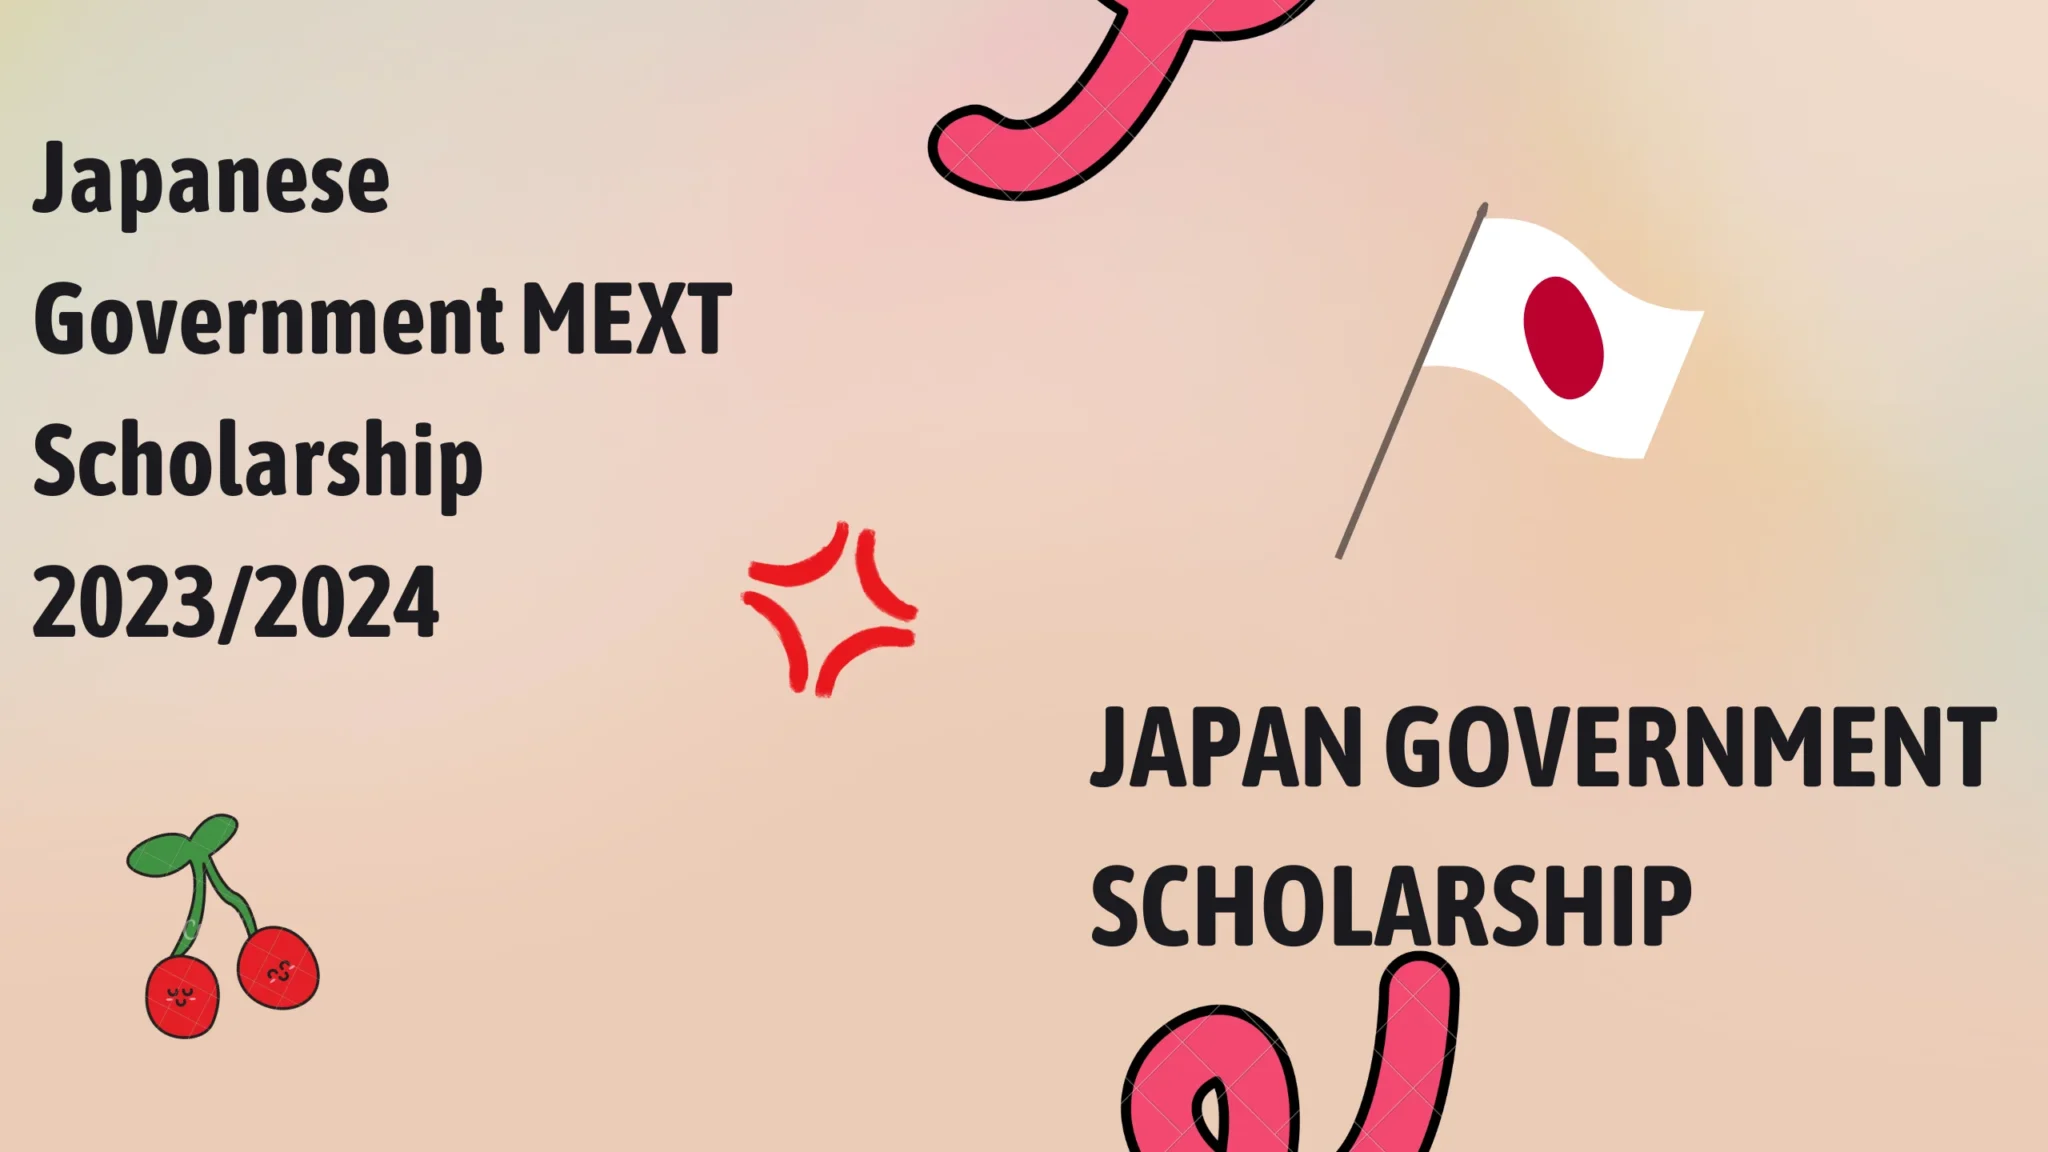 Japanese Government MEXT Scholarship  2023/2024